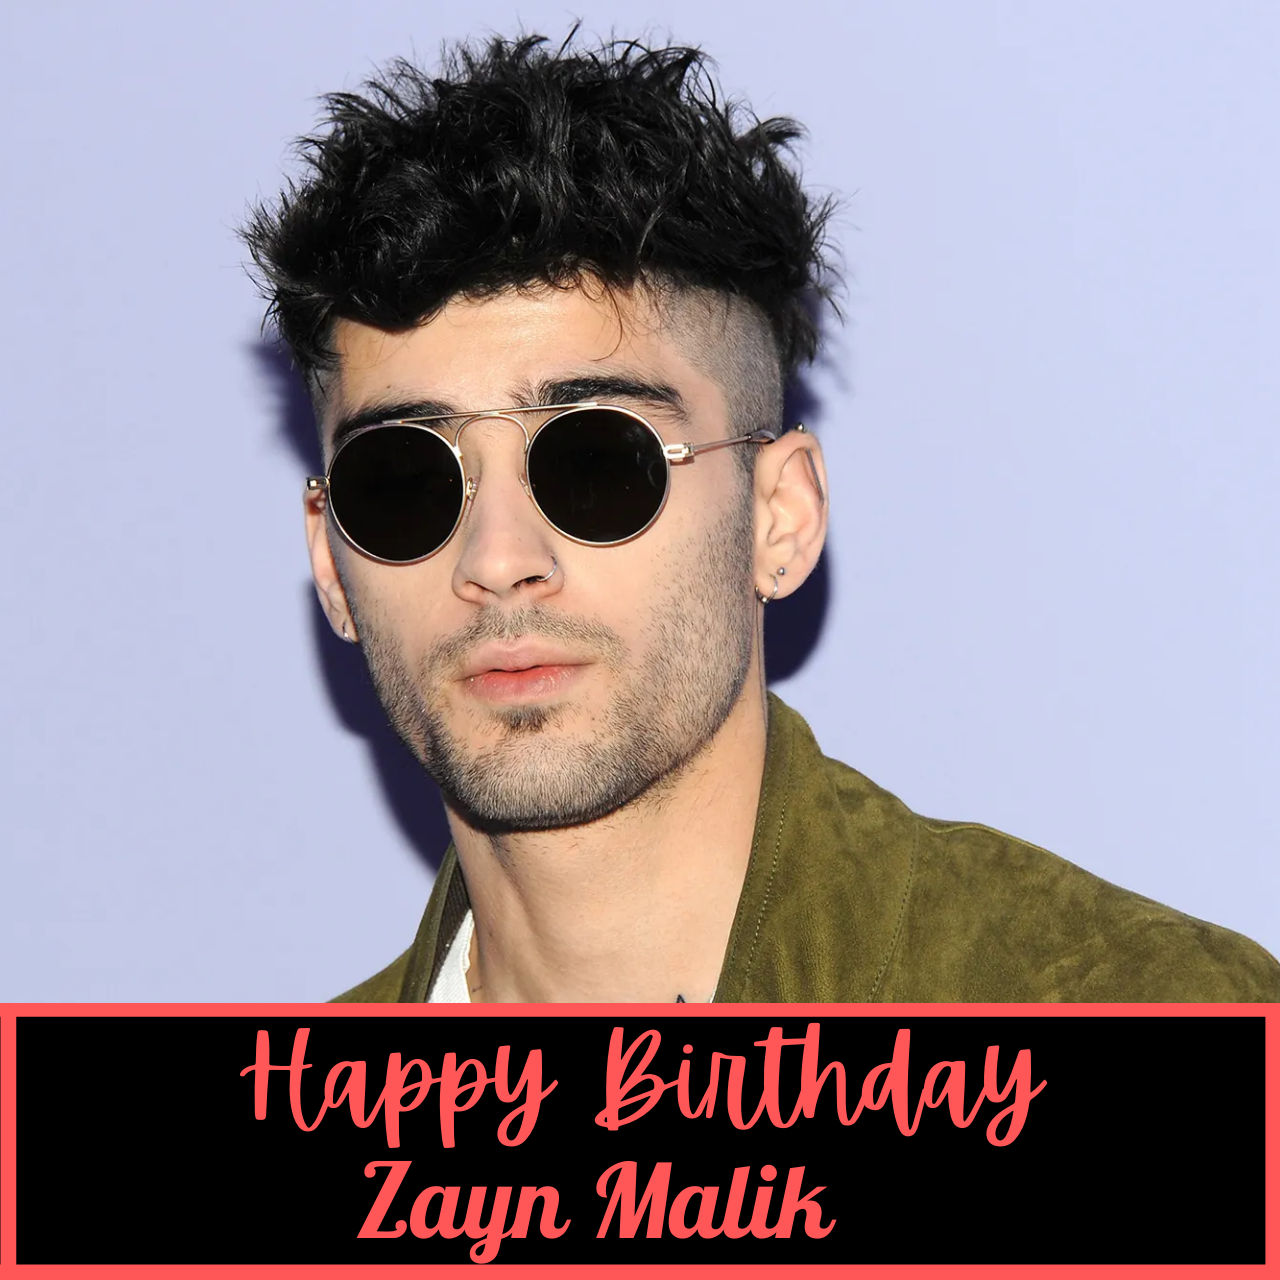 Happy Birthday Zayn Malik: Wishes, HD Images, Messages, Quotes, Greetings to greet Young Sensation